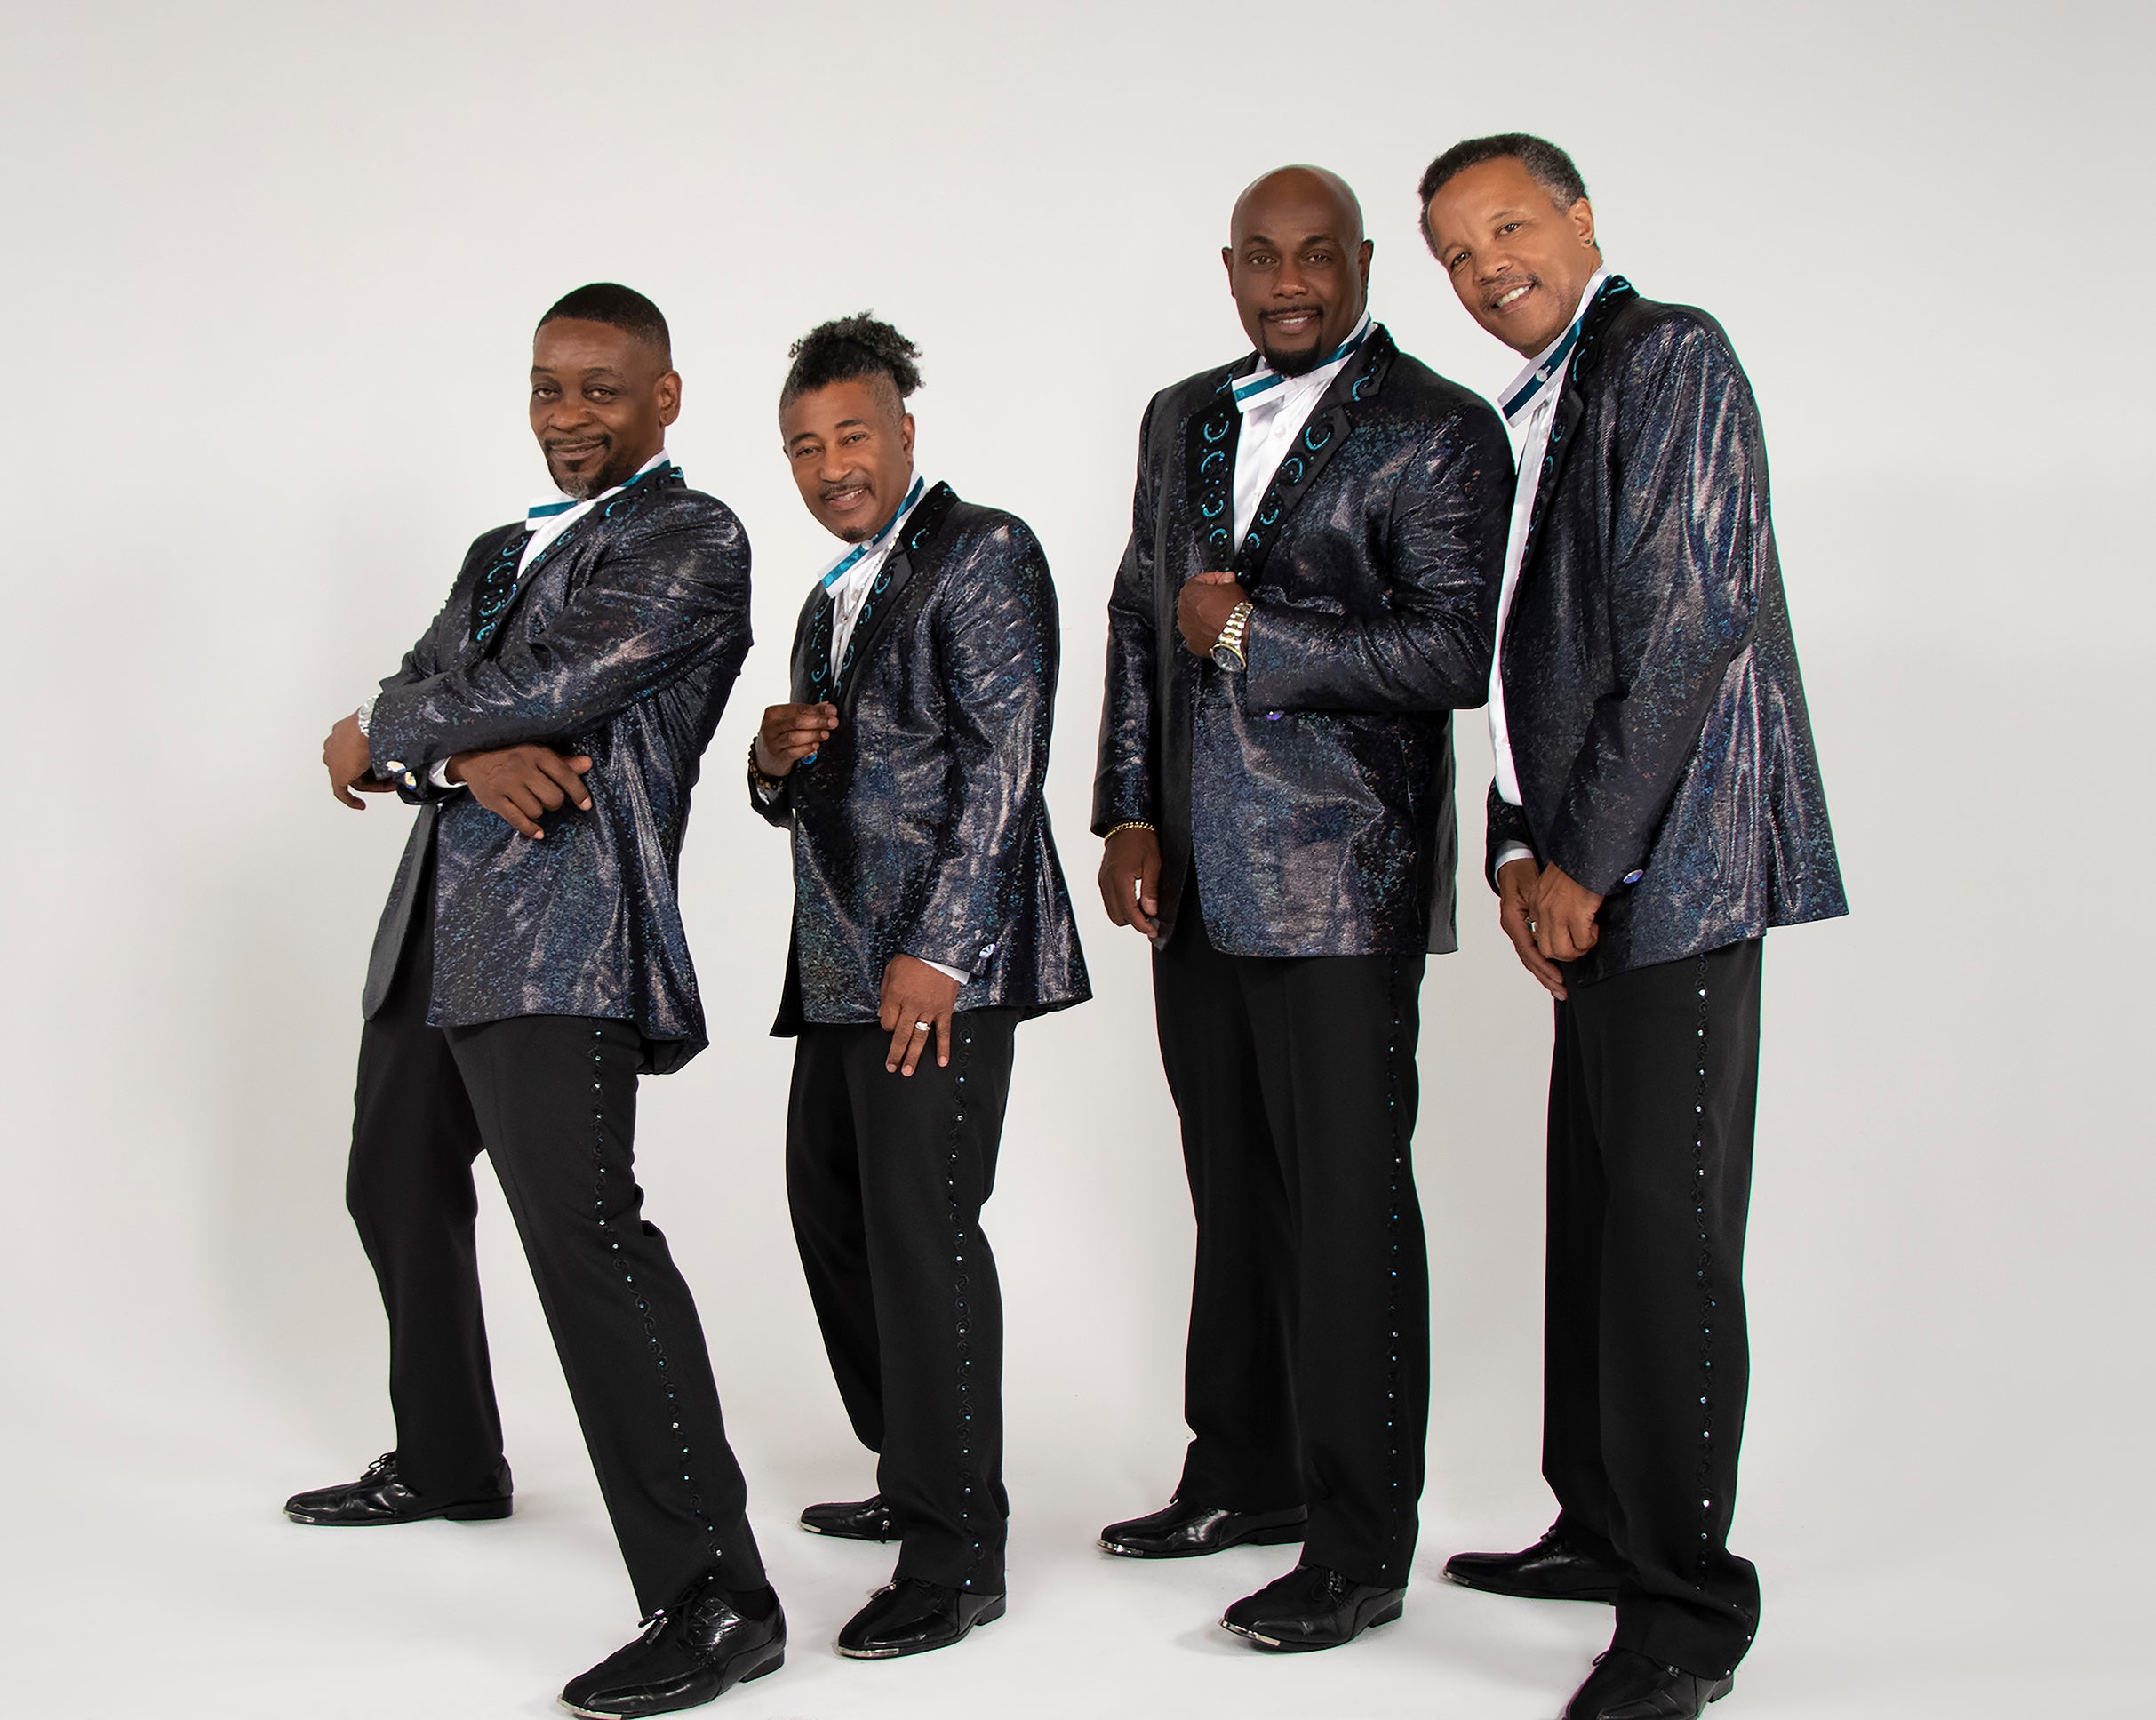 The Spinners at Bally's Event Center